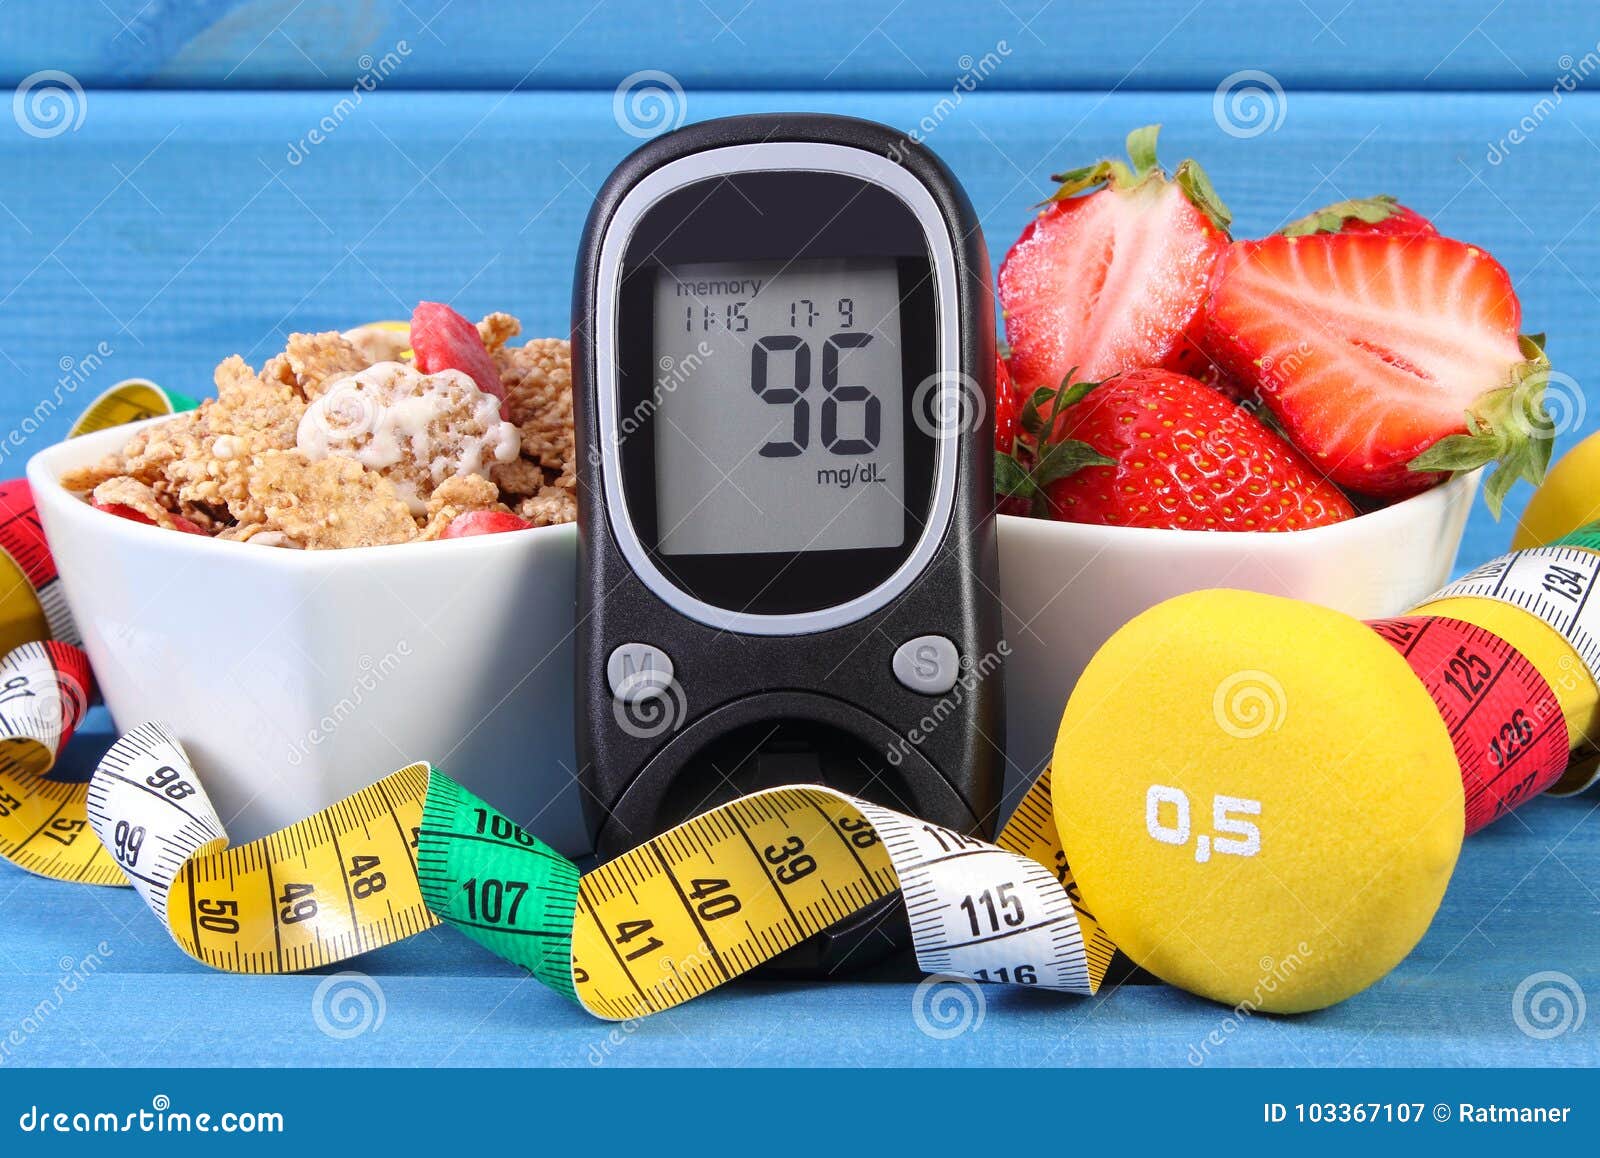 glucometer for checking sugar level, healthy food, dumbbells and centimeter, diabetes, healthy and sporty lifestyle